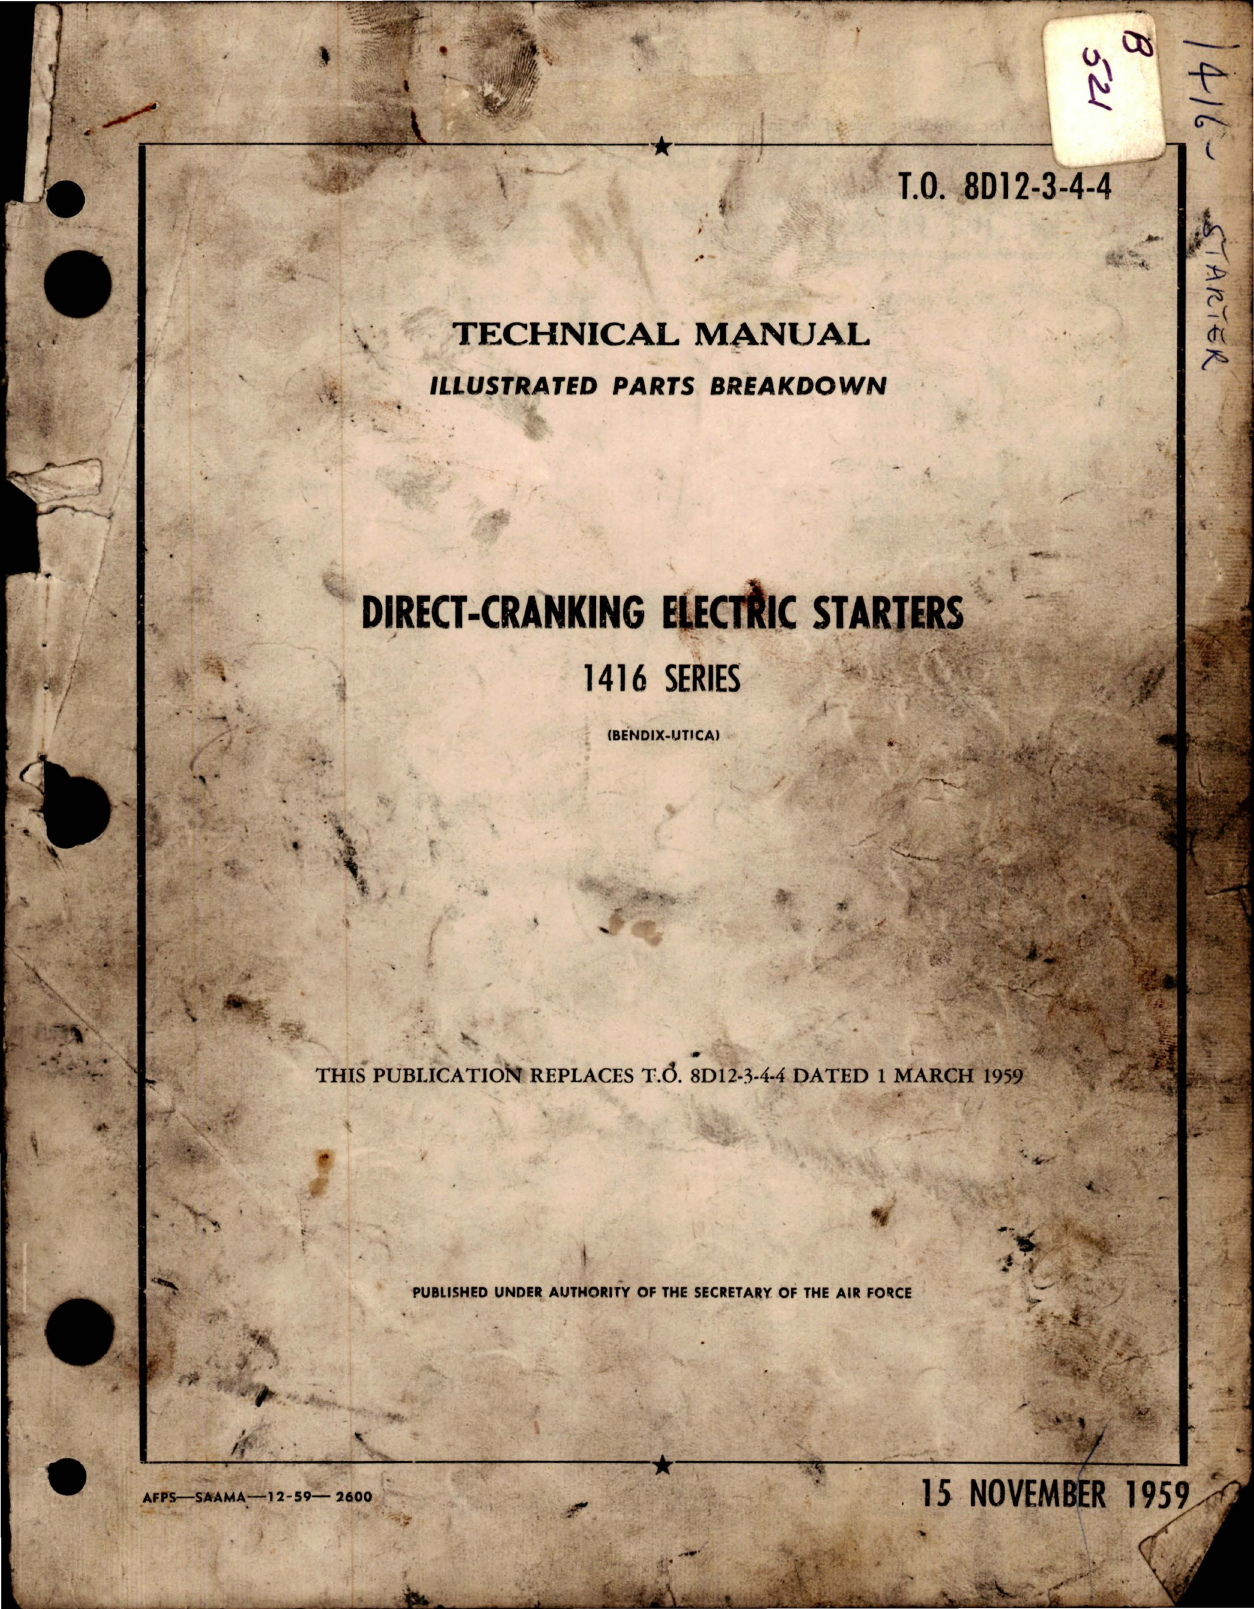 Sample page 1 from AirCorps Library document: Illustrated Parts Breakdown for Direct Cranking Electric Starters - 1416 Series 